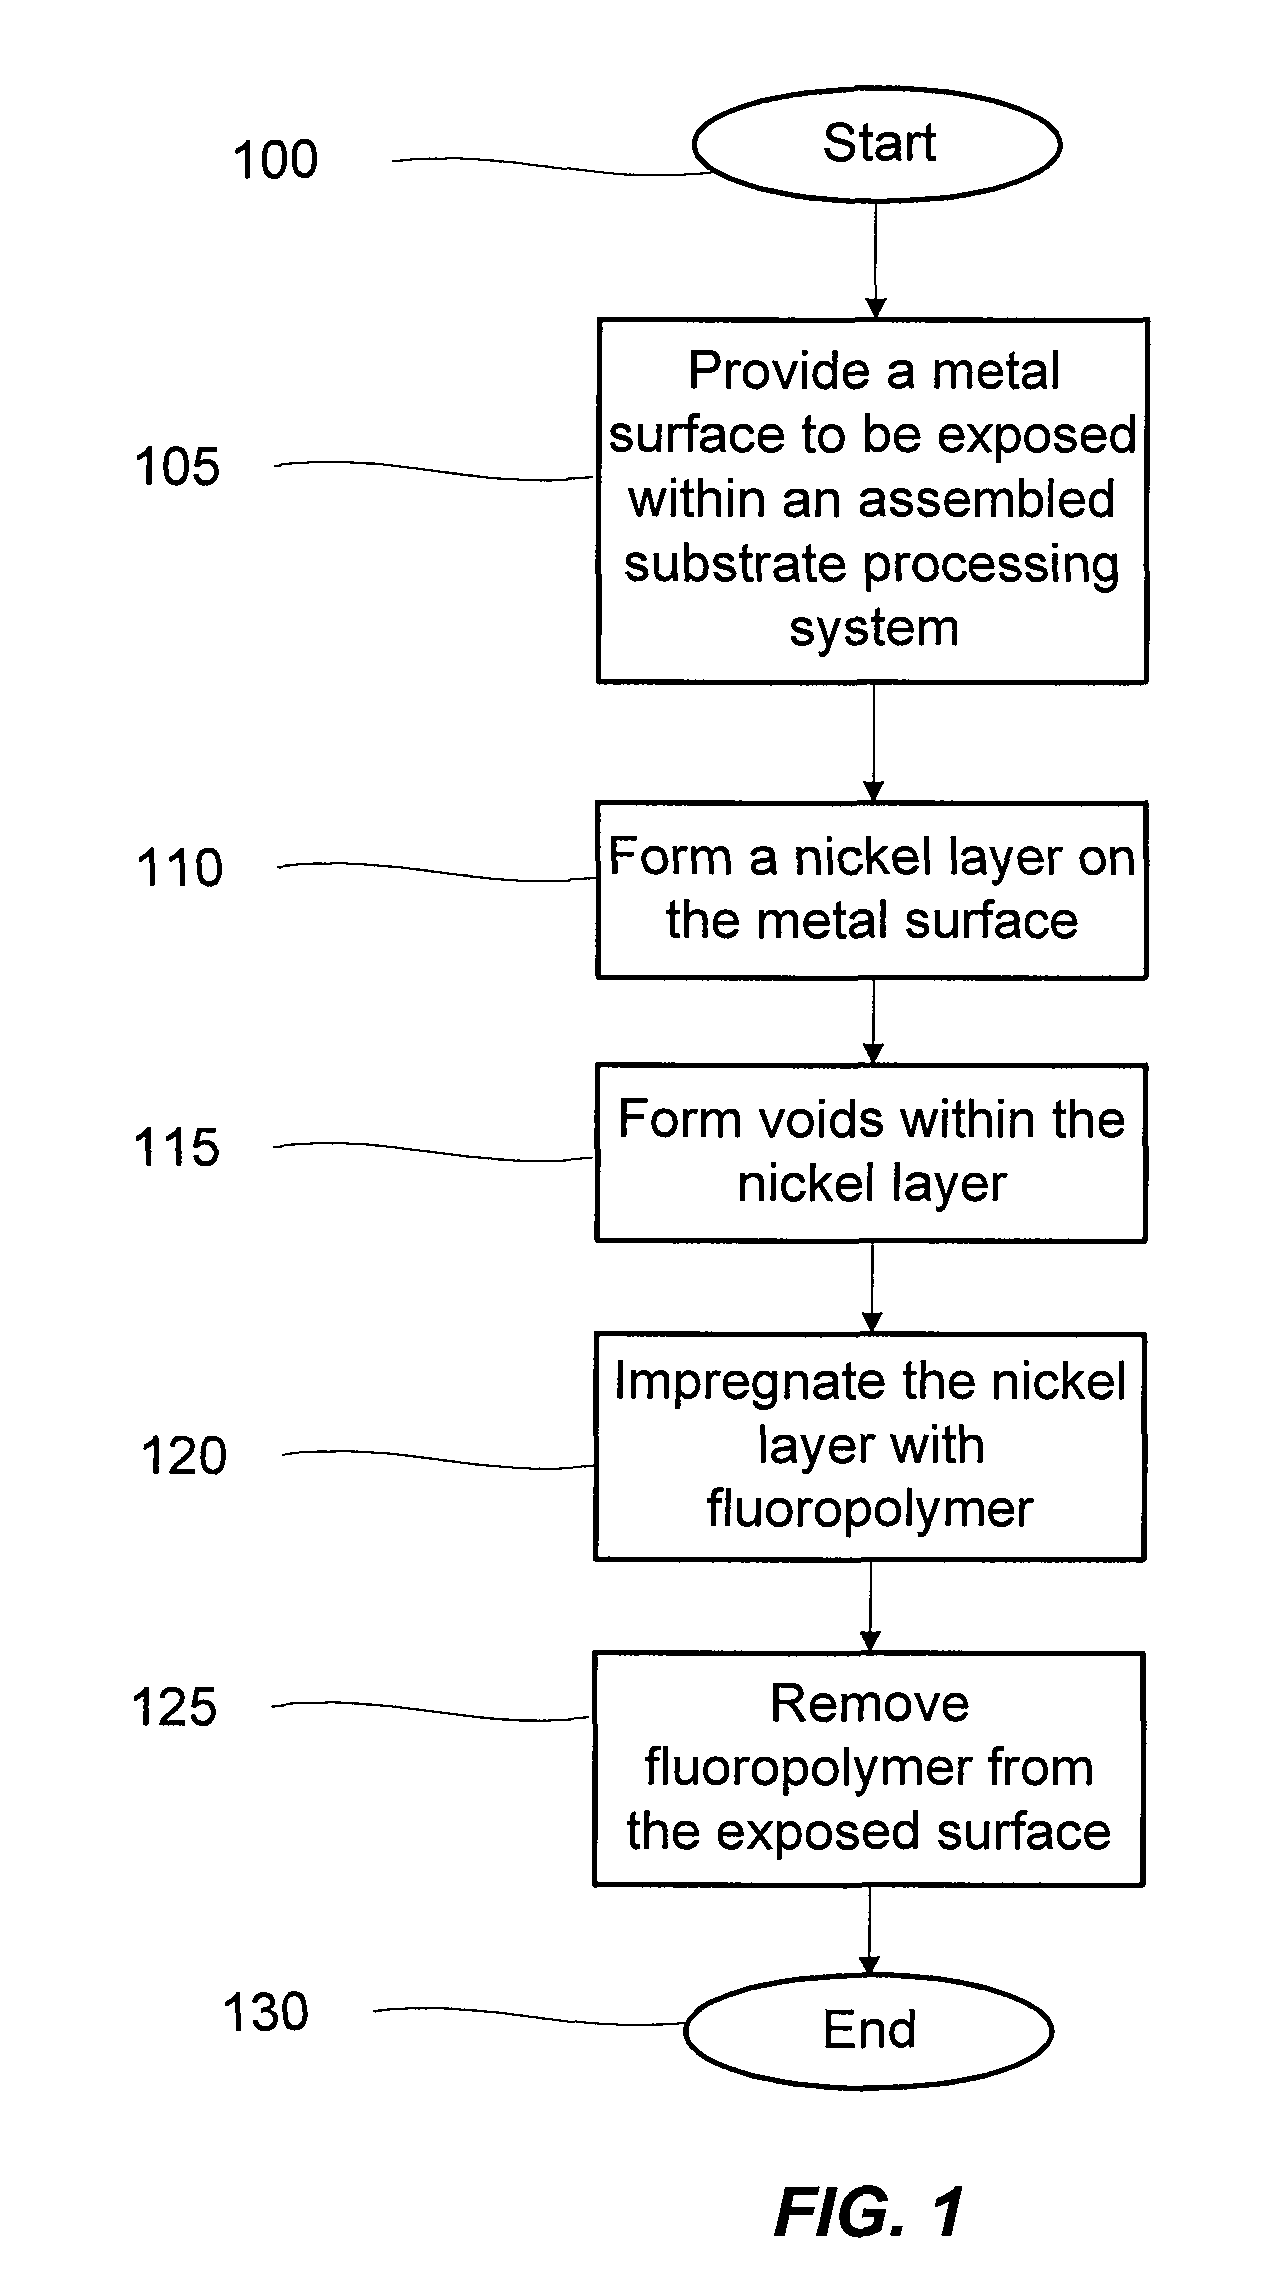 Polymeric coating of substrate processing system components for contamination control